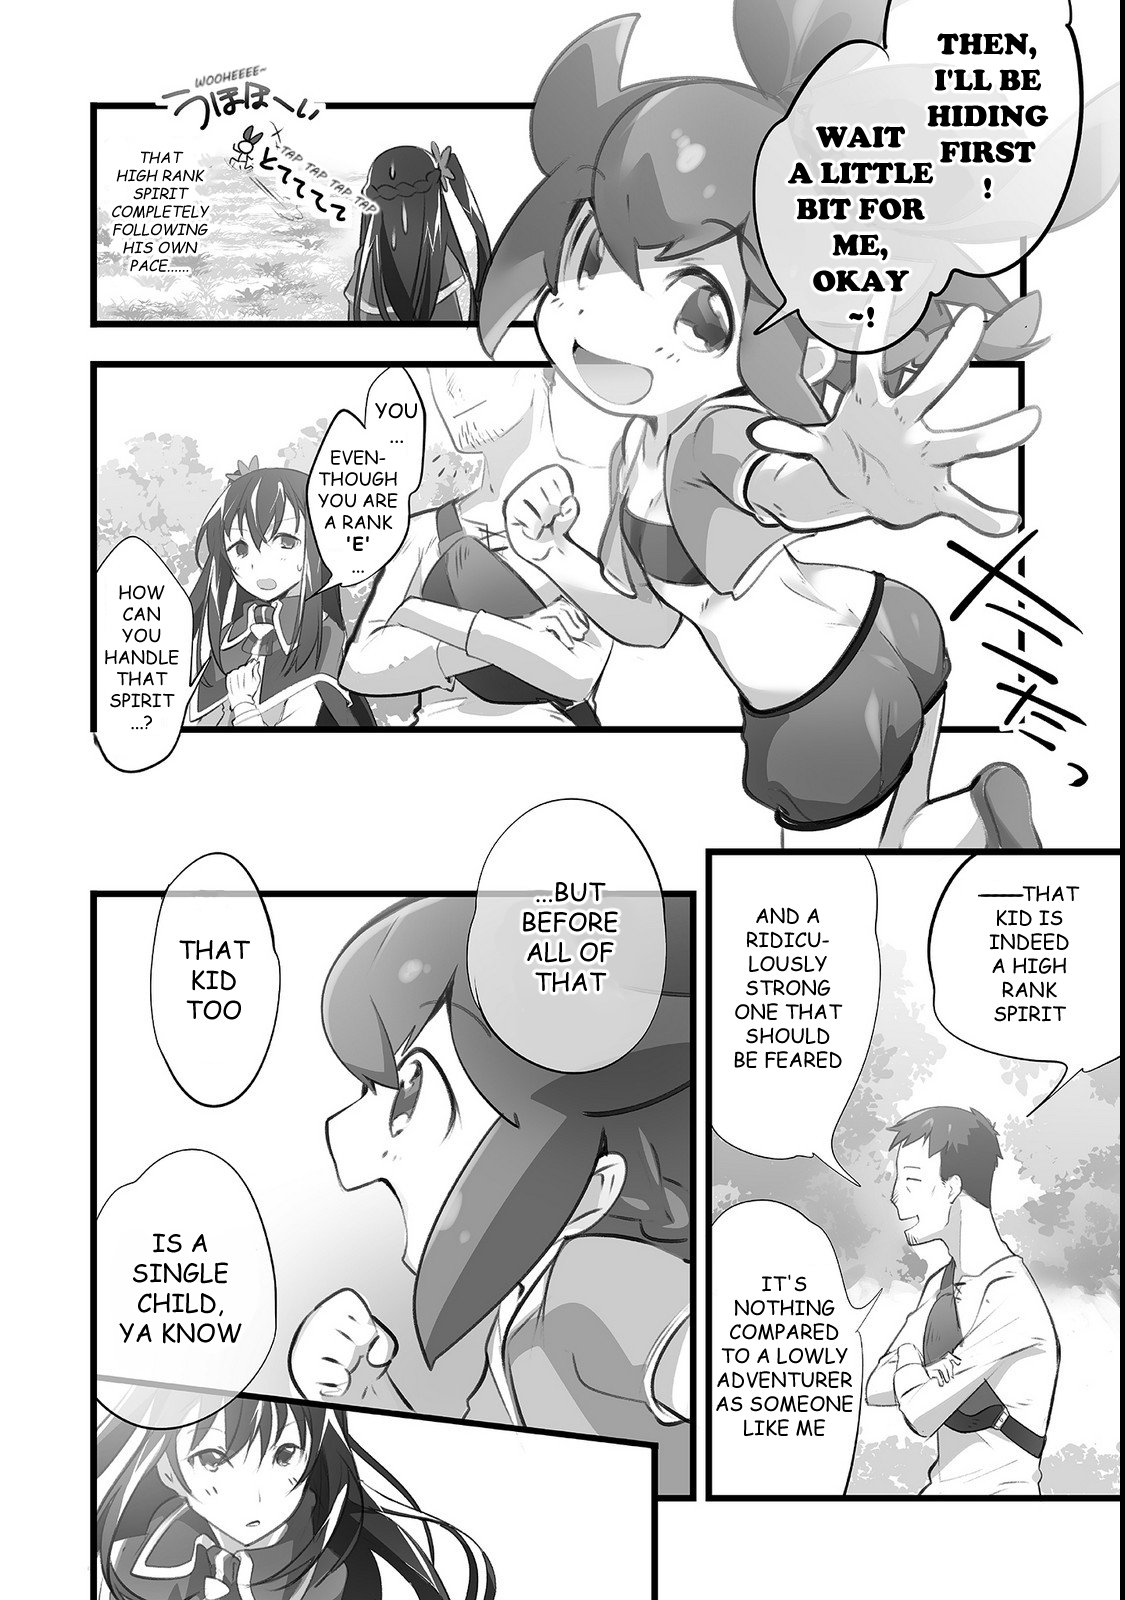 Opened The "Different World Nursery School"  ~The Strongest Loli Spirits Are Deredere By Paternity Skill~ vol.1 ch.2